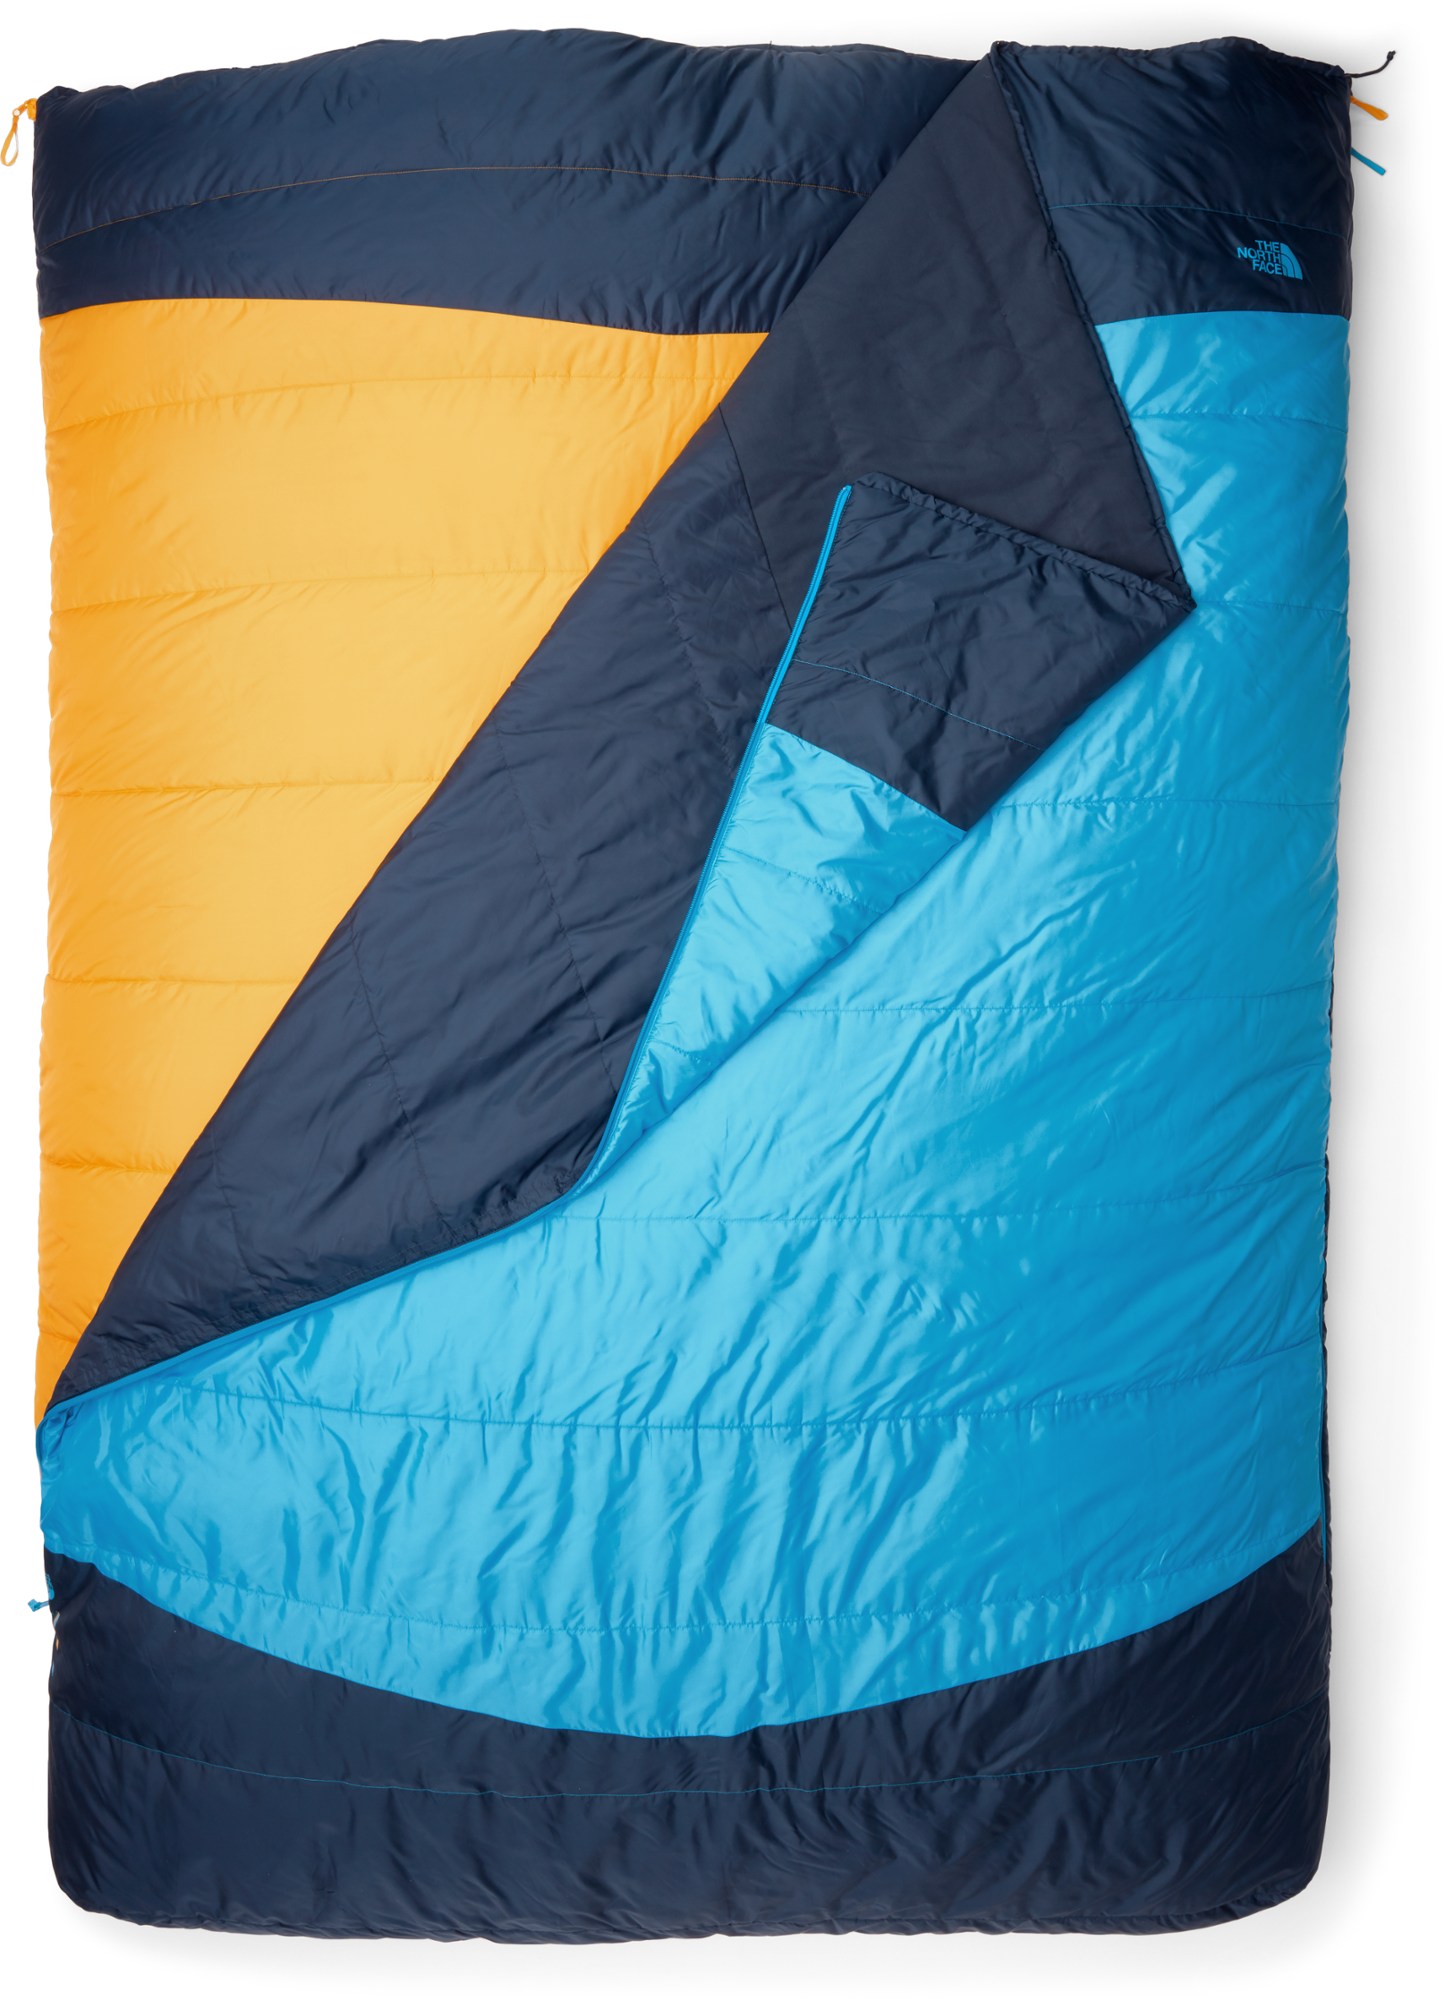 Best Overall Camping Sleeping Bag